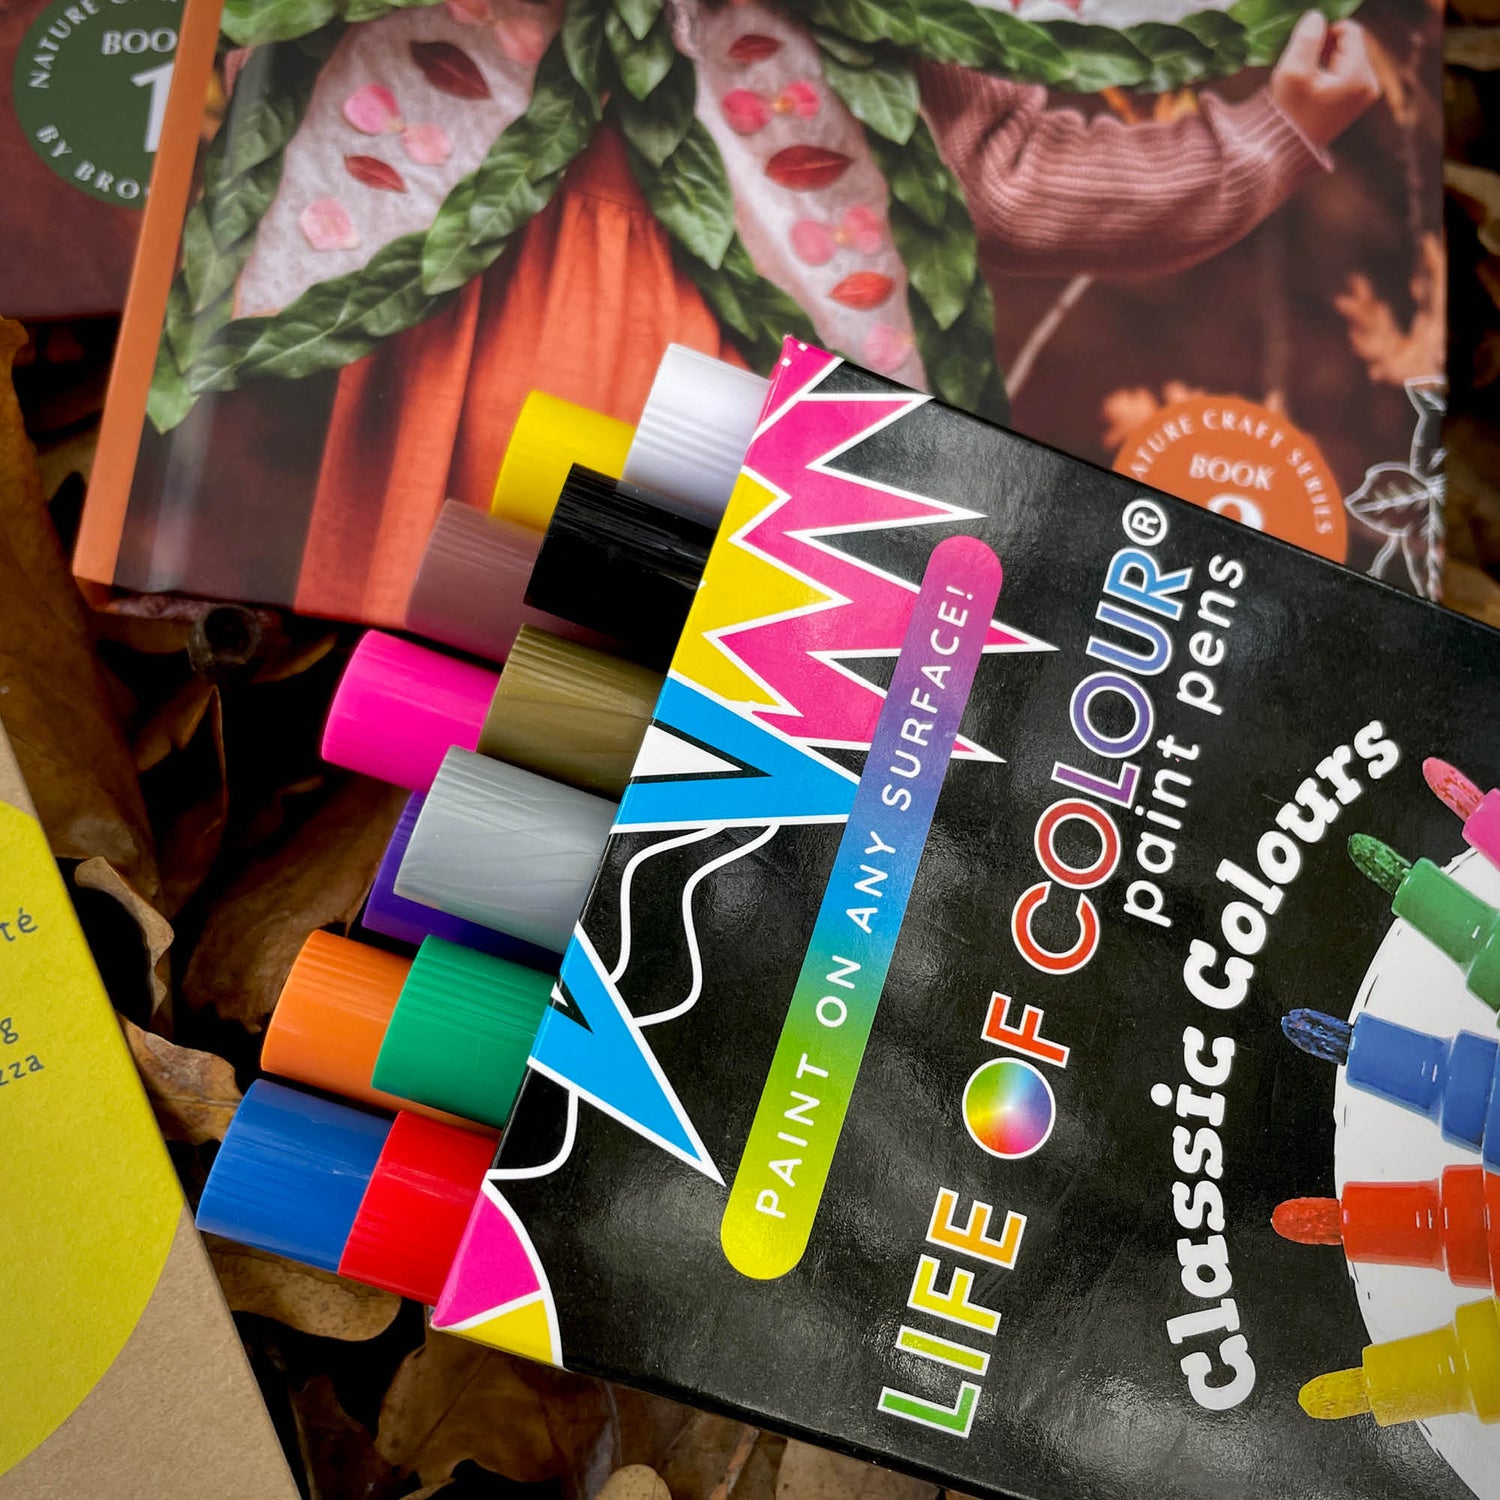 Nature Craft Starter Pack from Your Wild Books includes Wild Imagination book, Wild Child book, paint pens in classic colours and an opinel beginners whittling knife. Save 20%